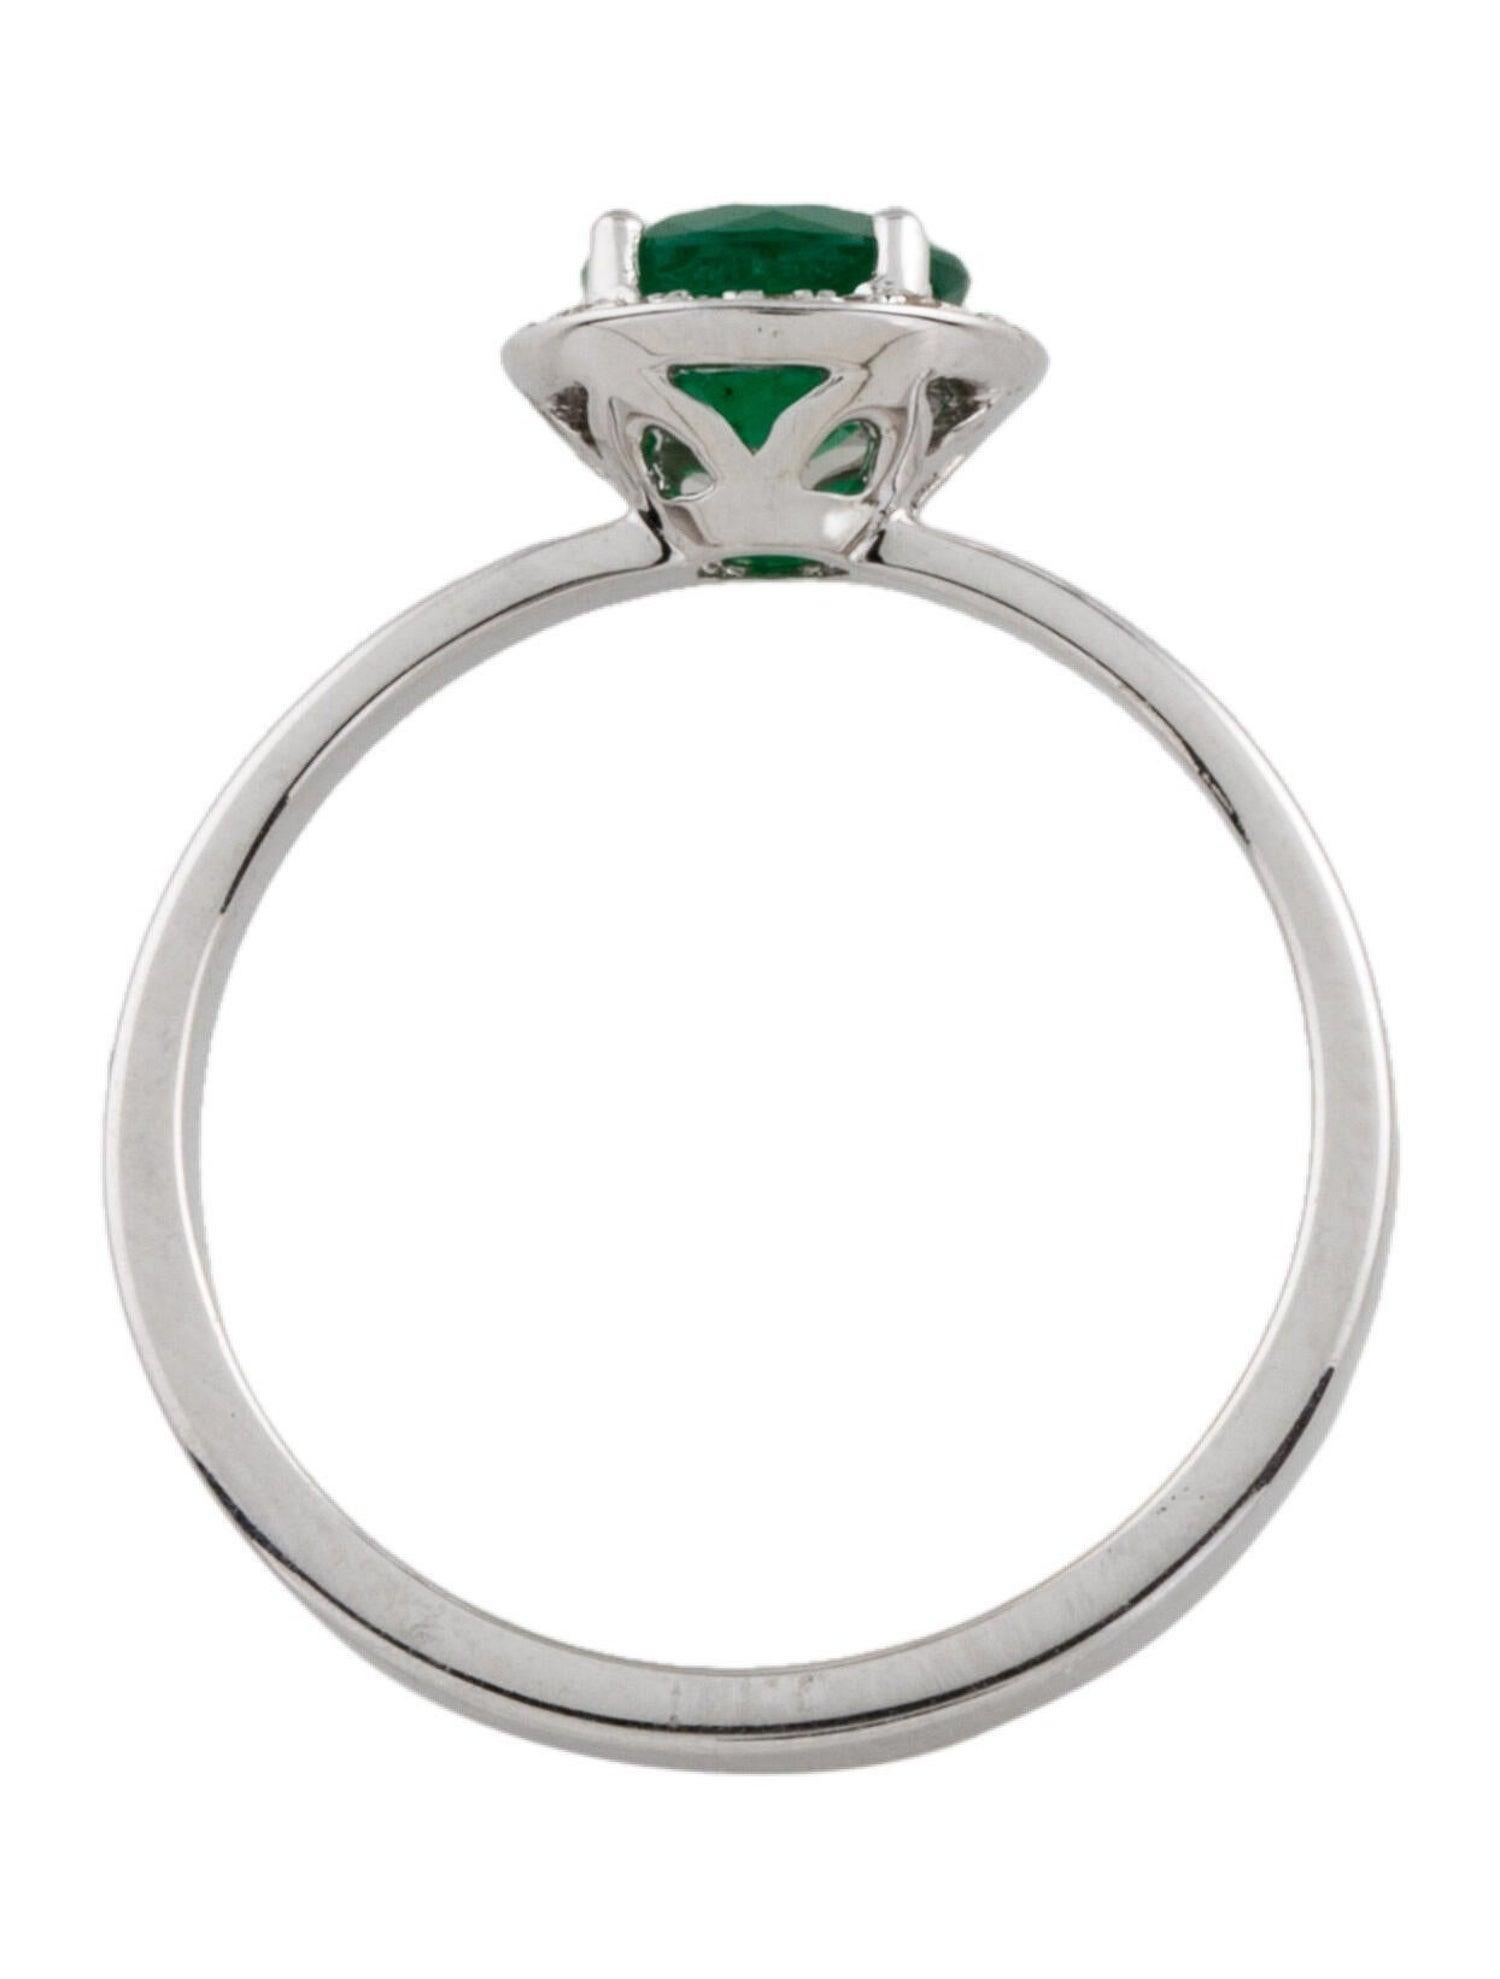 18K Emerald & Diamond Cocktail Ring - Size 6.75 - Elegant Statement Jewelry In New Condition For Sale In Holtsville, NY